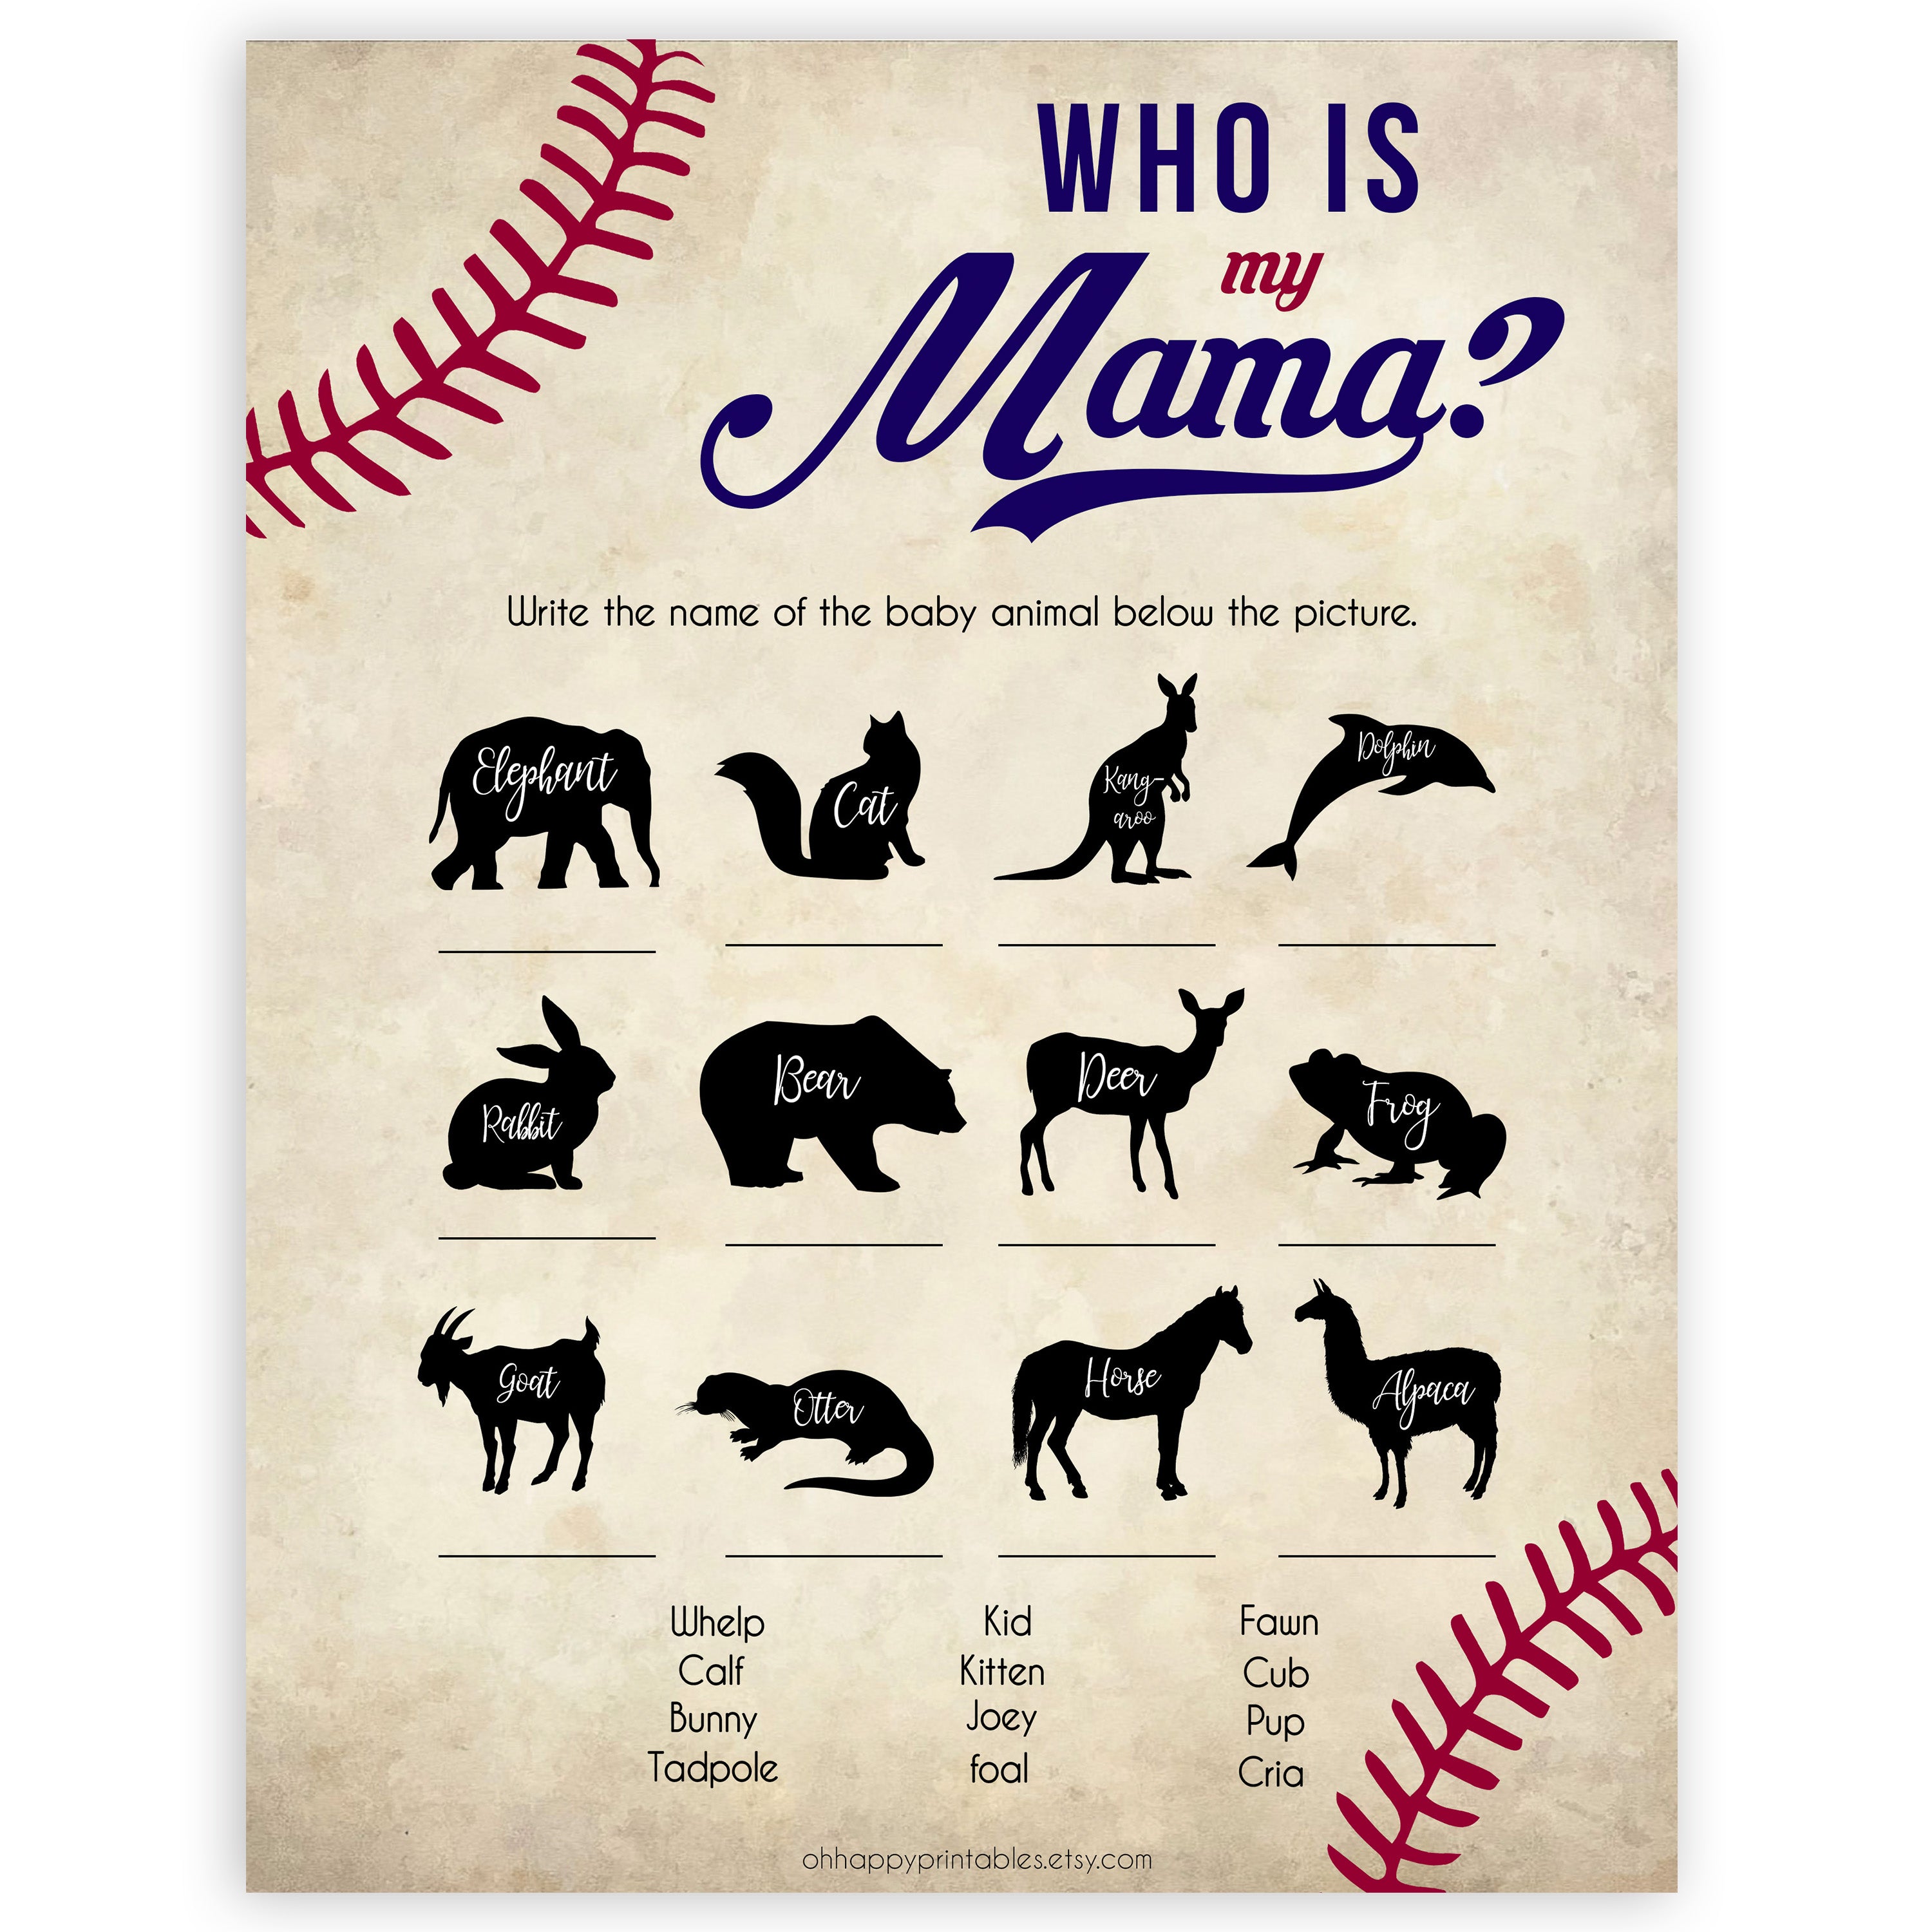 Who is My Mama Baby Shower Game, Baseball Who is My Mommy, Baby Animal Game, Baby Shower Games, Who is My Mama, Who is My Mommy Game, printable baby shower games, fun baby shower games, popular baby shower games